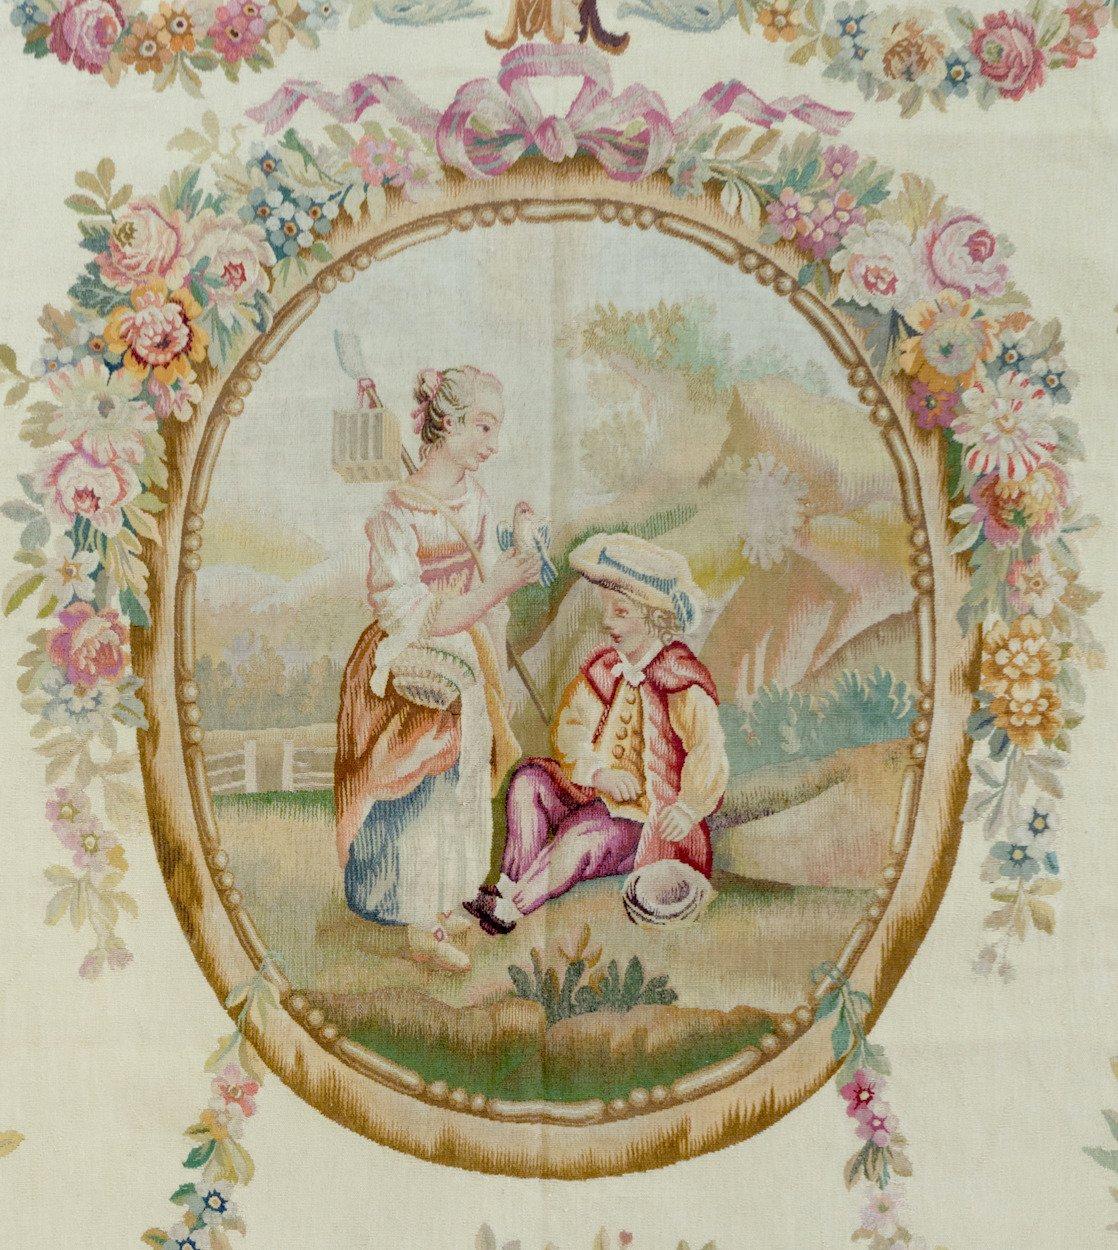 This is a lovely antique 19th century ivory ornate floral French Aubusson tapestry. It has floral garlands and an oval window looking onto a scene with a woman presenting a dove to a seated boy. It measures: 5.3 x 6.6 ft.

If you are interested in